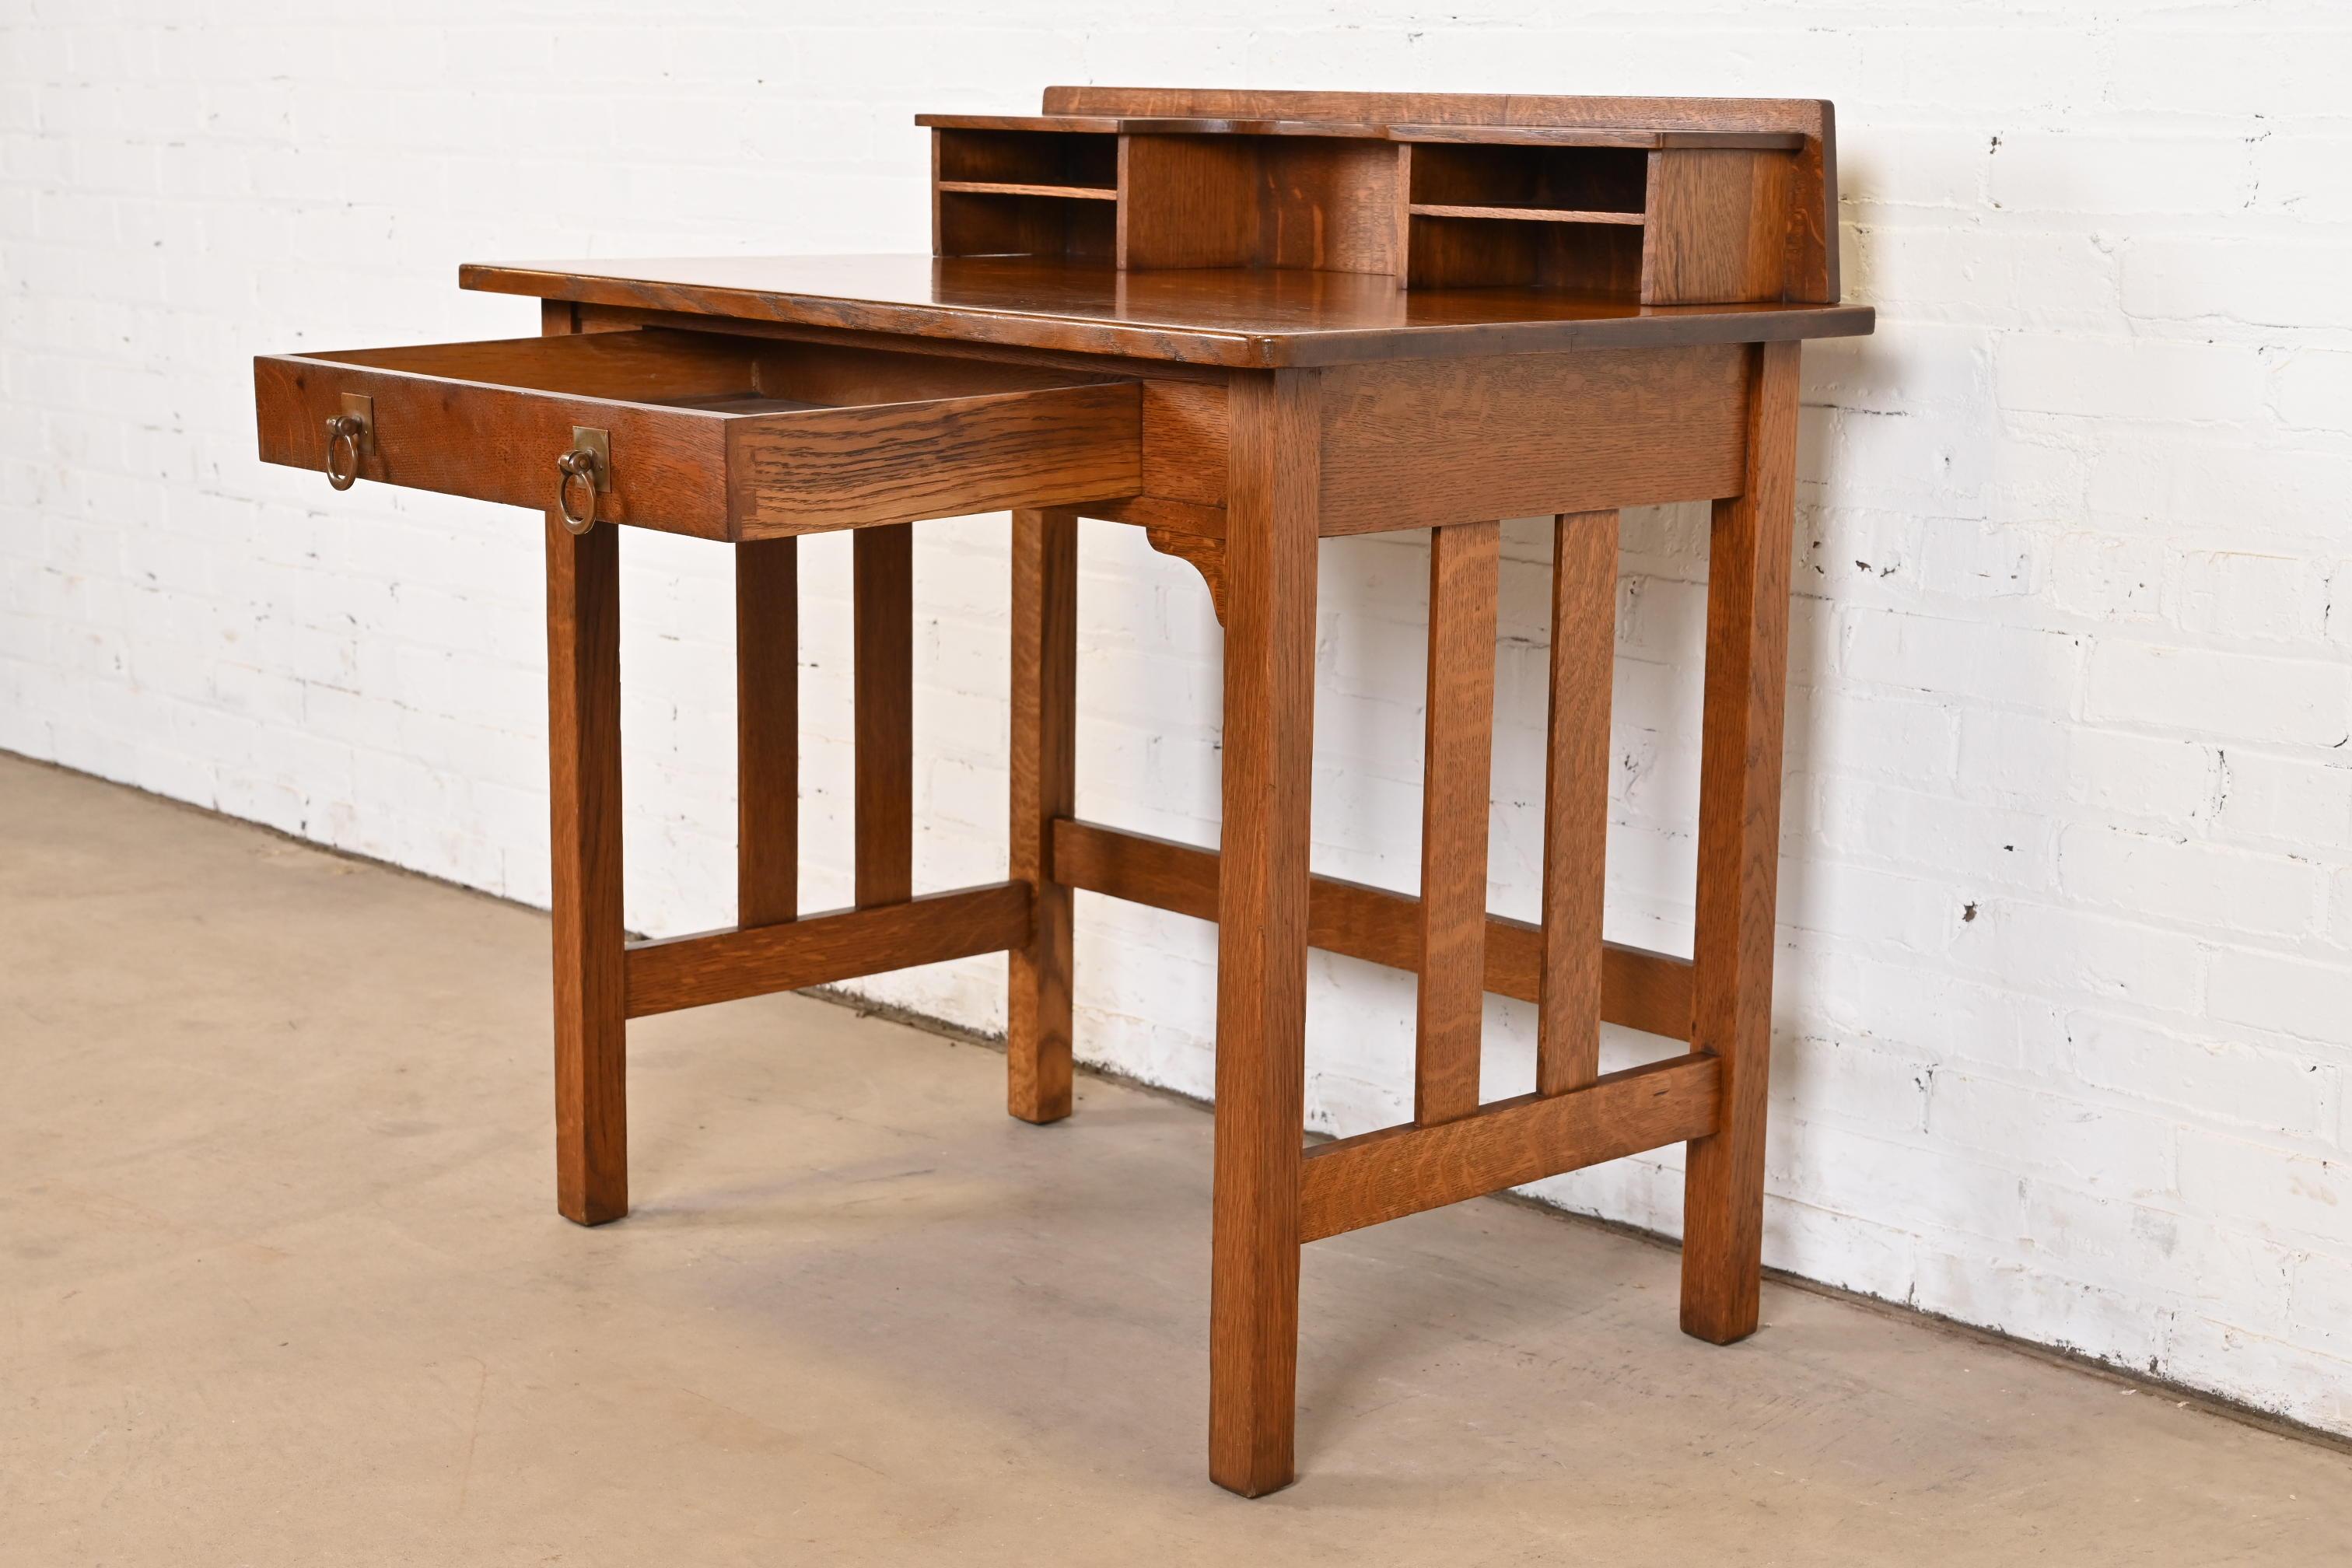 20th Century Antique Stickley Brothers Mission Oak Arts & Crafts Writing Desk, Circa 1900 For Sale